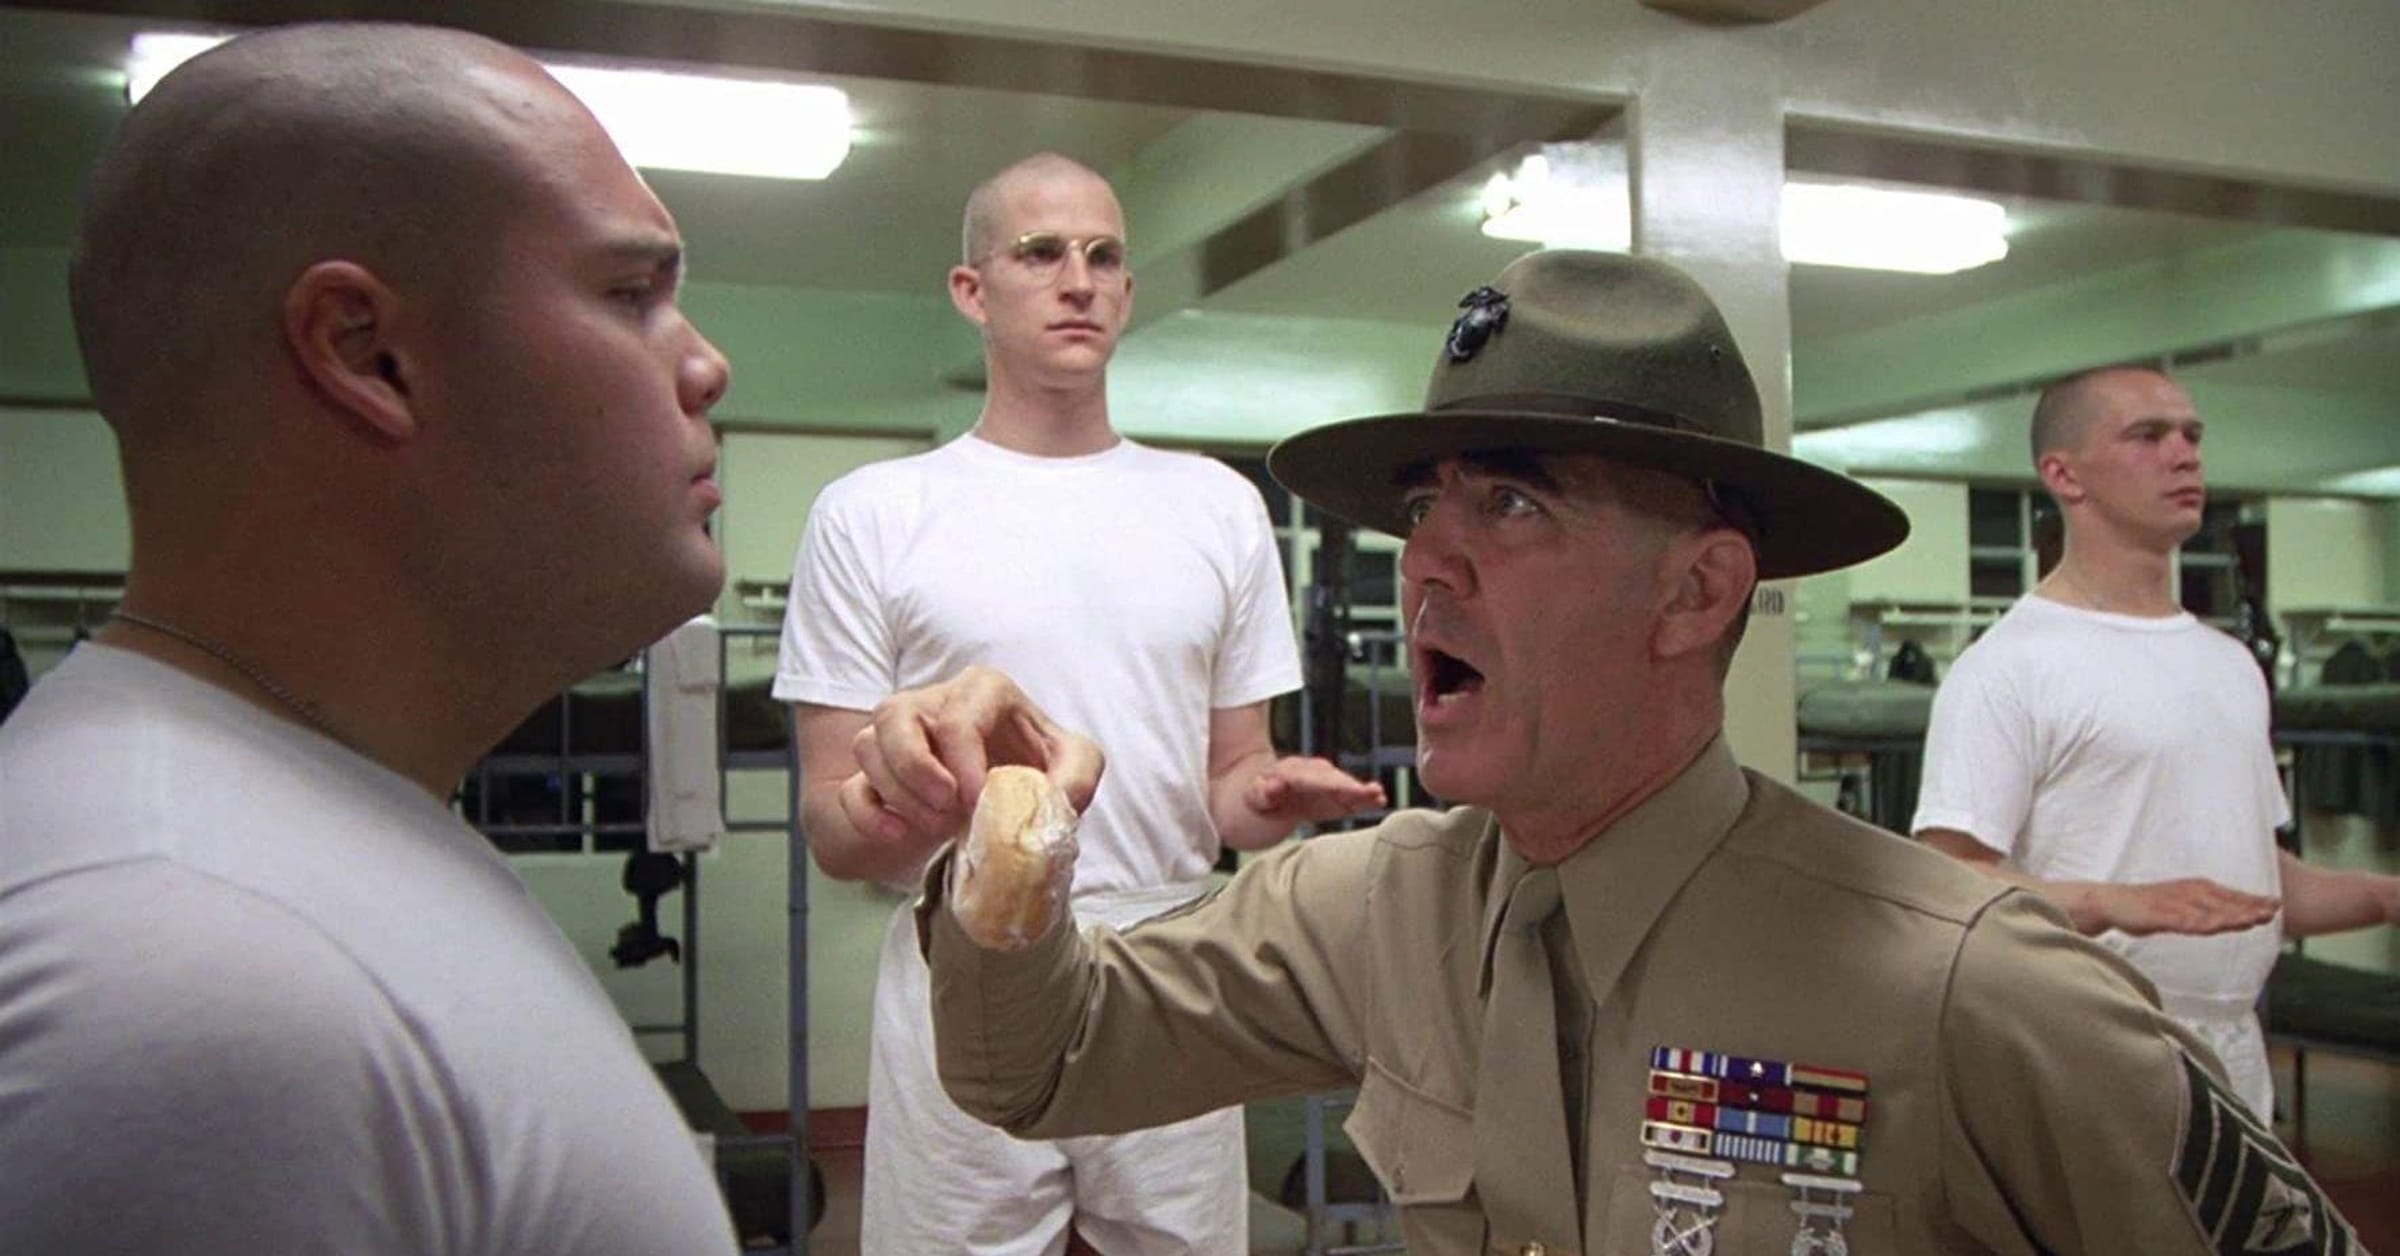 A shot from one of the boot camp scenes from the movie "Full Metal Jacket", Kubrick's famous interpretation of the war movie genre.